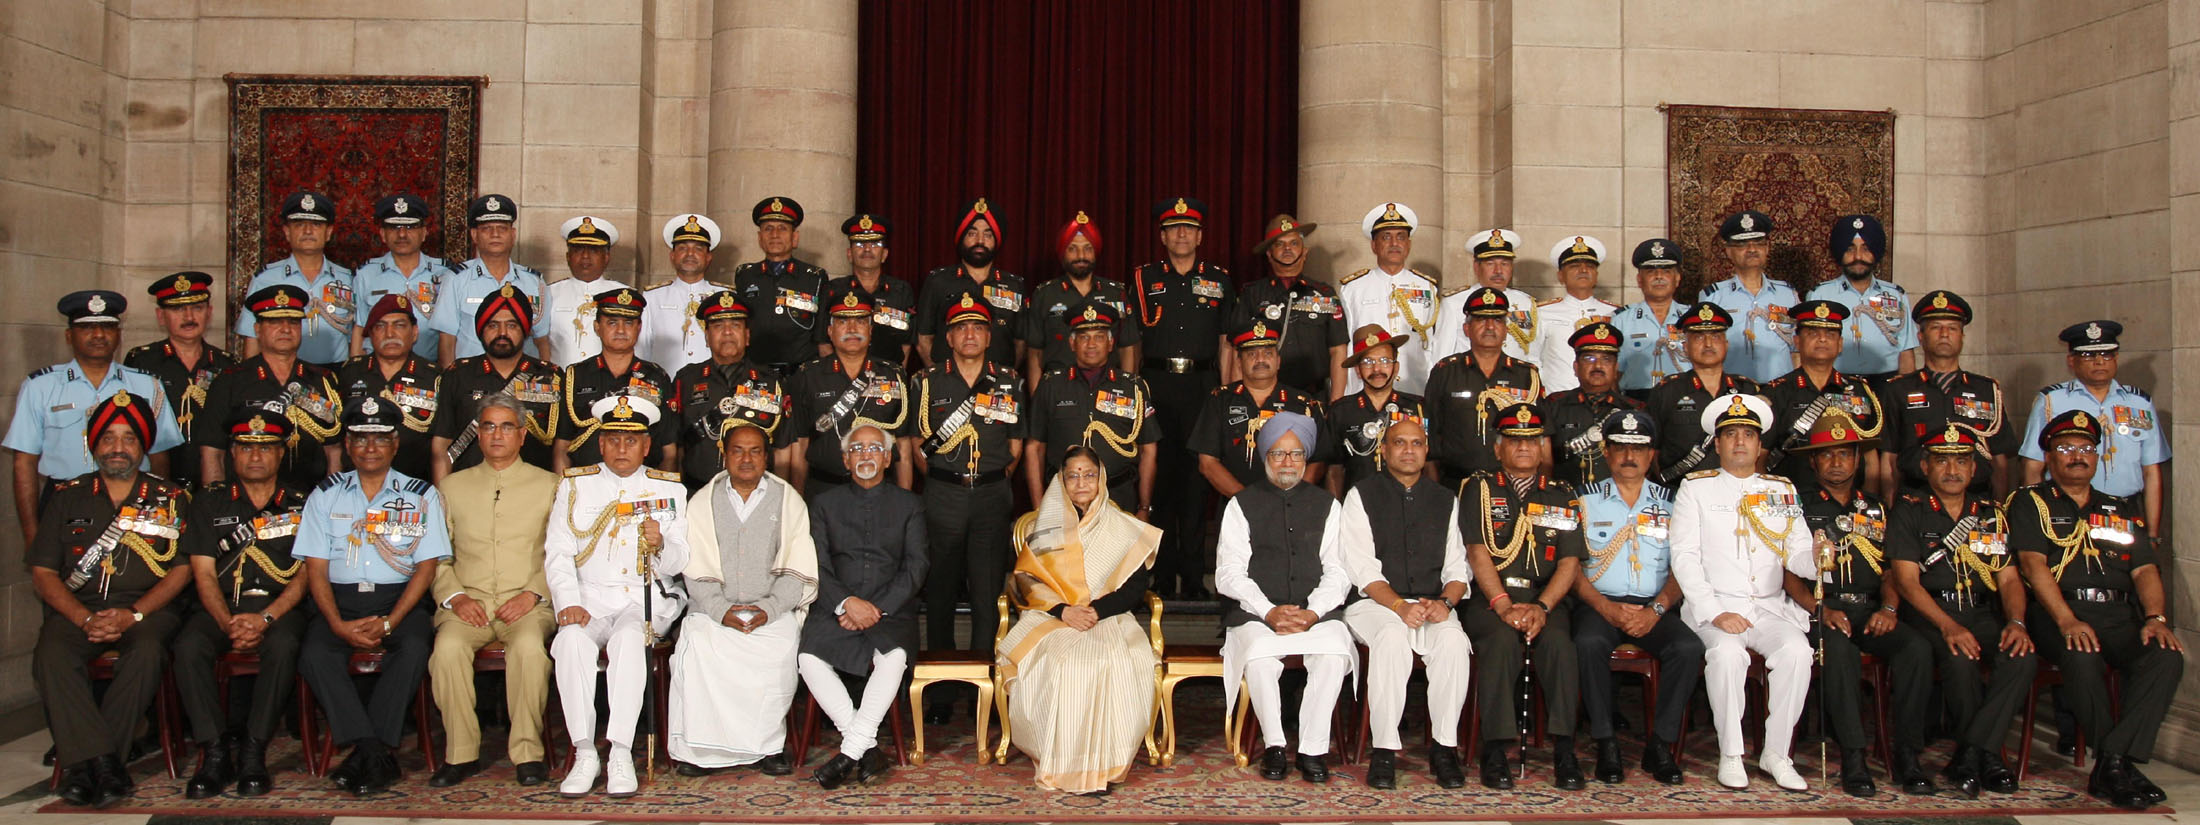 The President, Smt. Pratibha Devisingh Patil, the Vice President, Shri Mohd. Hamid Ansari, the Prime Minister, Dr. Manmohan Singh, the Defence Minister, Shri A. K. Antony and the Minister of State for Defence, Dr. M.M. Pallam Raju with awardees, at the Defence investiture ceremony, at Rashtrapati Bhavan, in New Delhi on March 14, 2012.